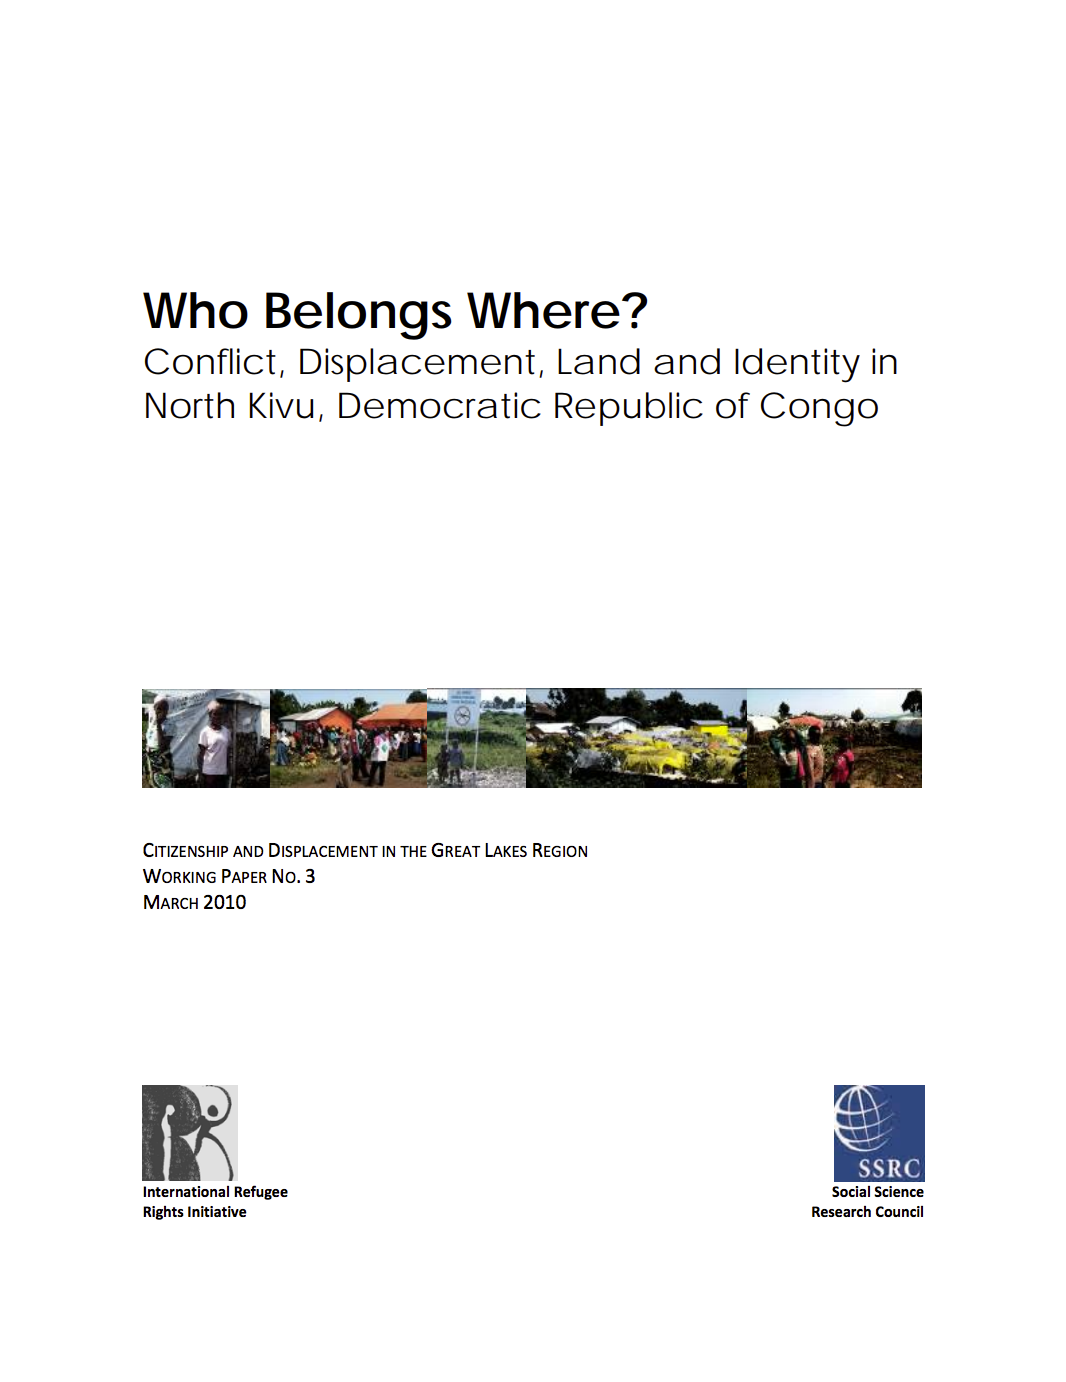 Who Belongs Where? Conflict, Displacement, Land and Identity in North Kivu, Democratic Republic of Congo cover image